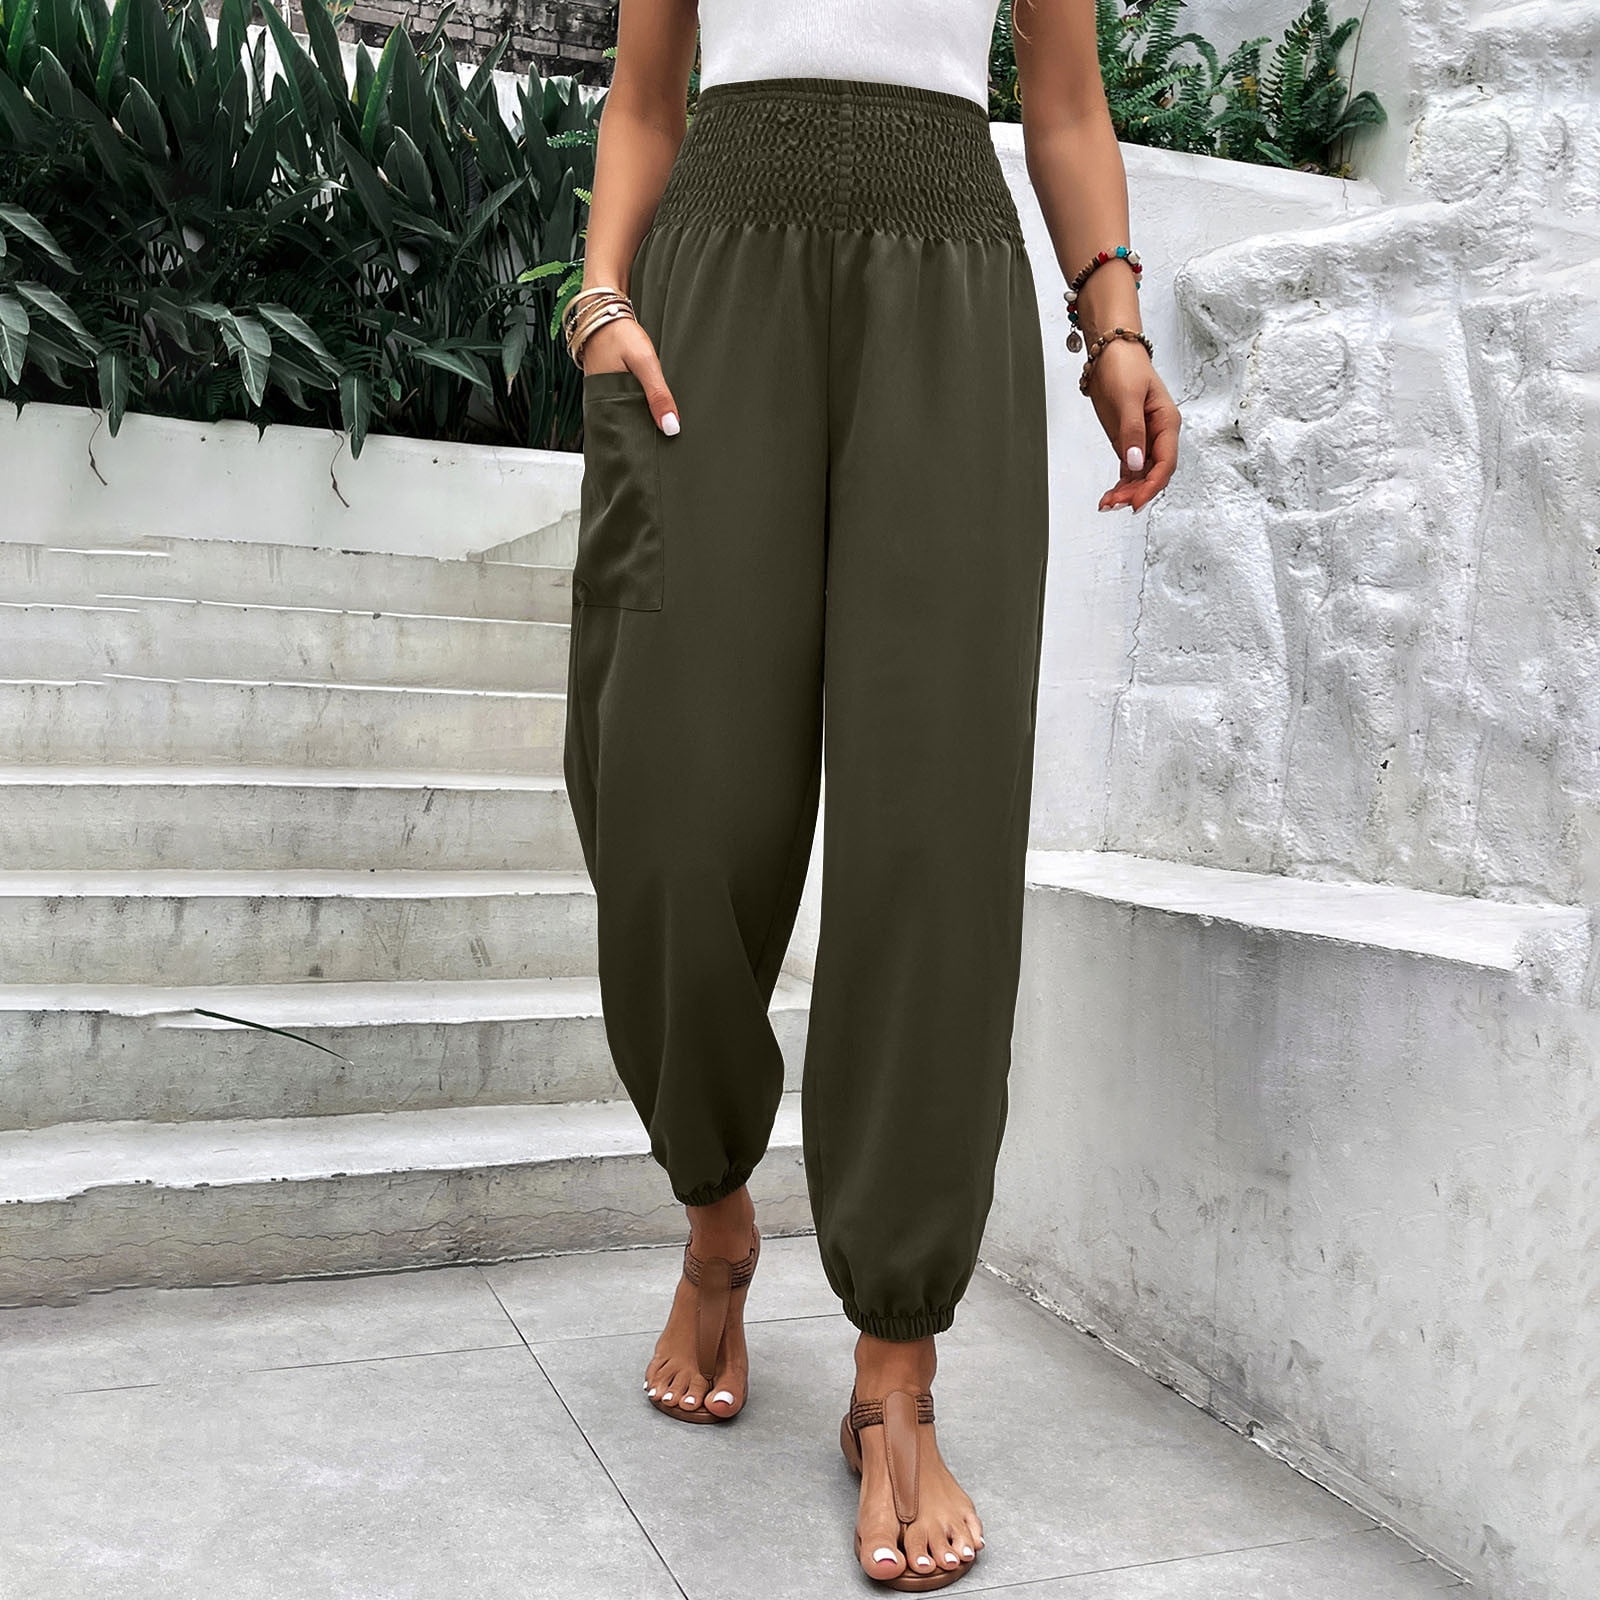 Jyeity Lots Of Styles And Prints, Solid Color Pants Straight Wide